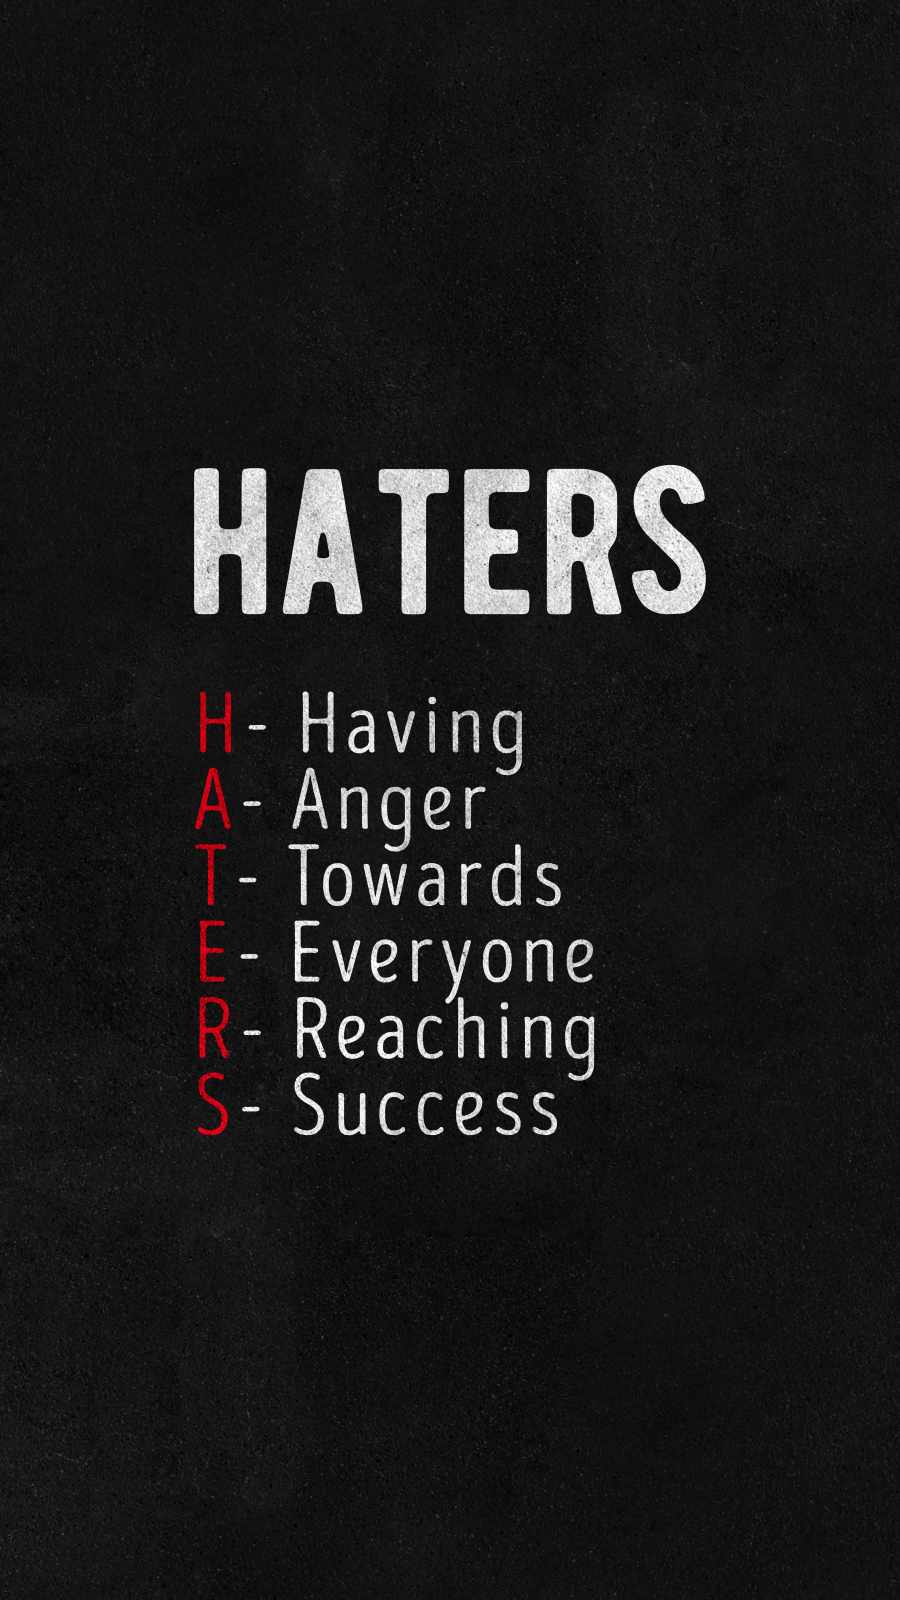 HATERS iPhone Wallpaper